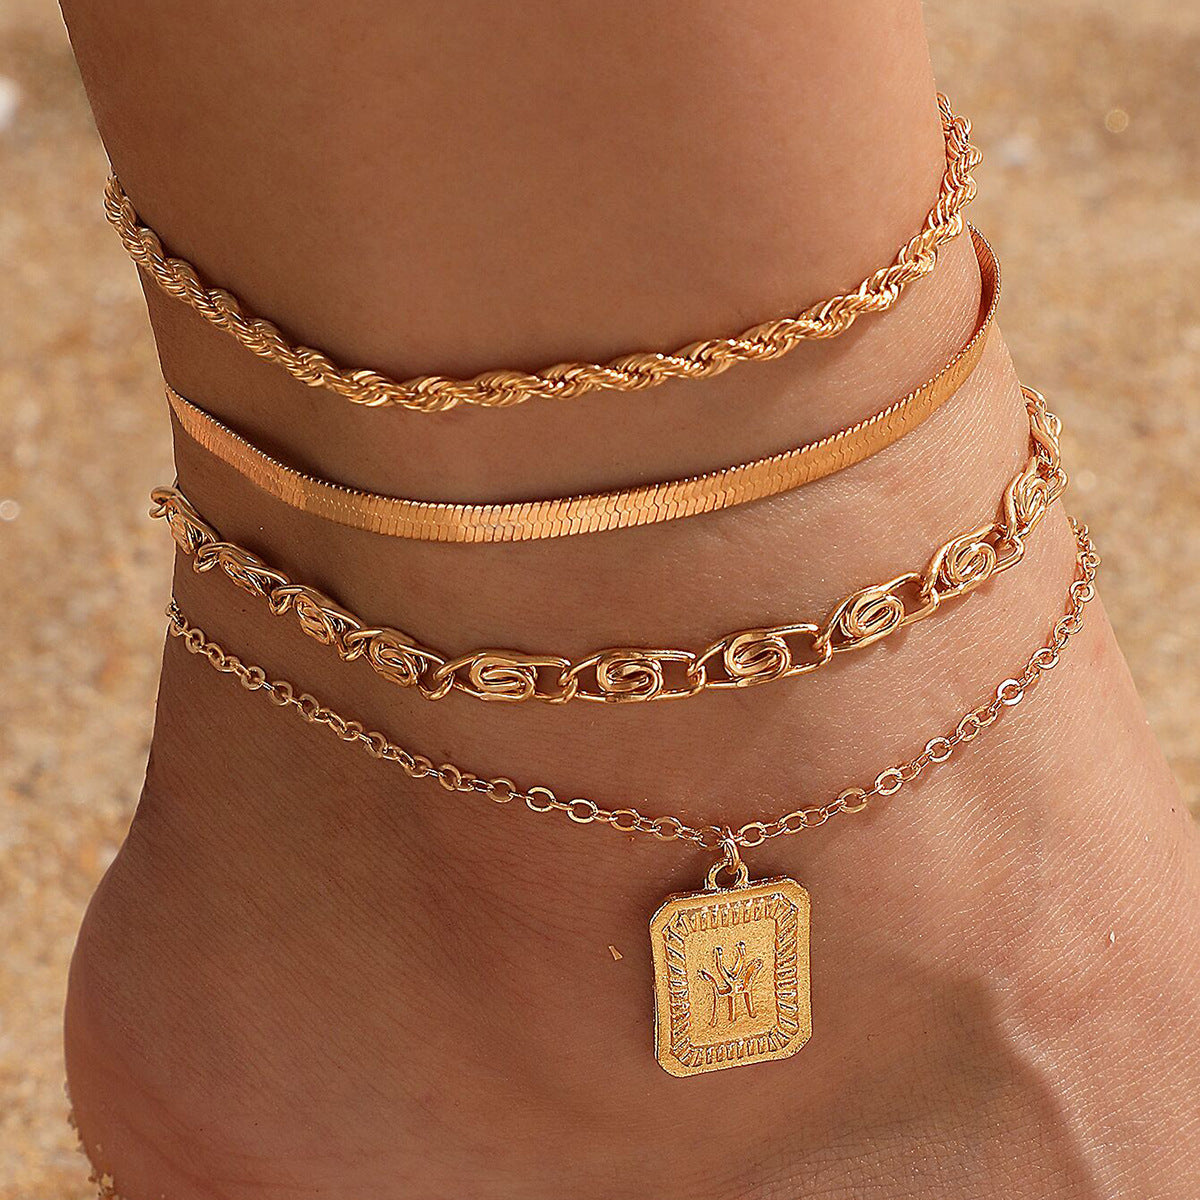 18K Gold-Plated Snake & Rope Chain Card-Charm Anklet Set